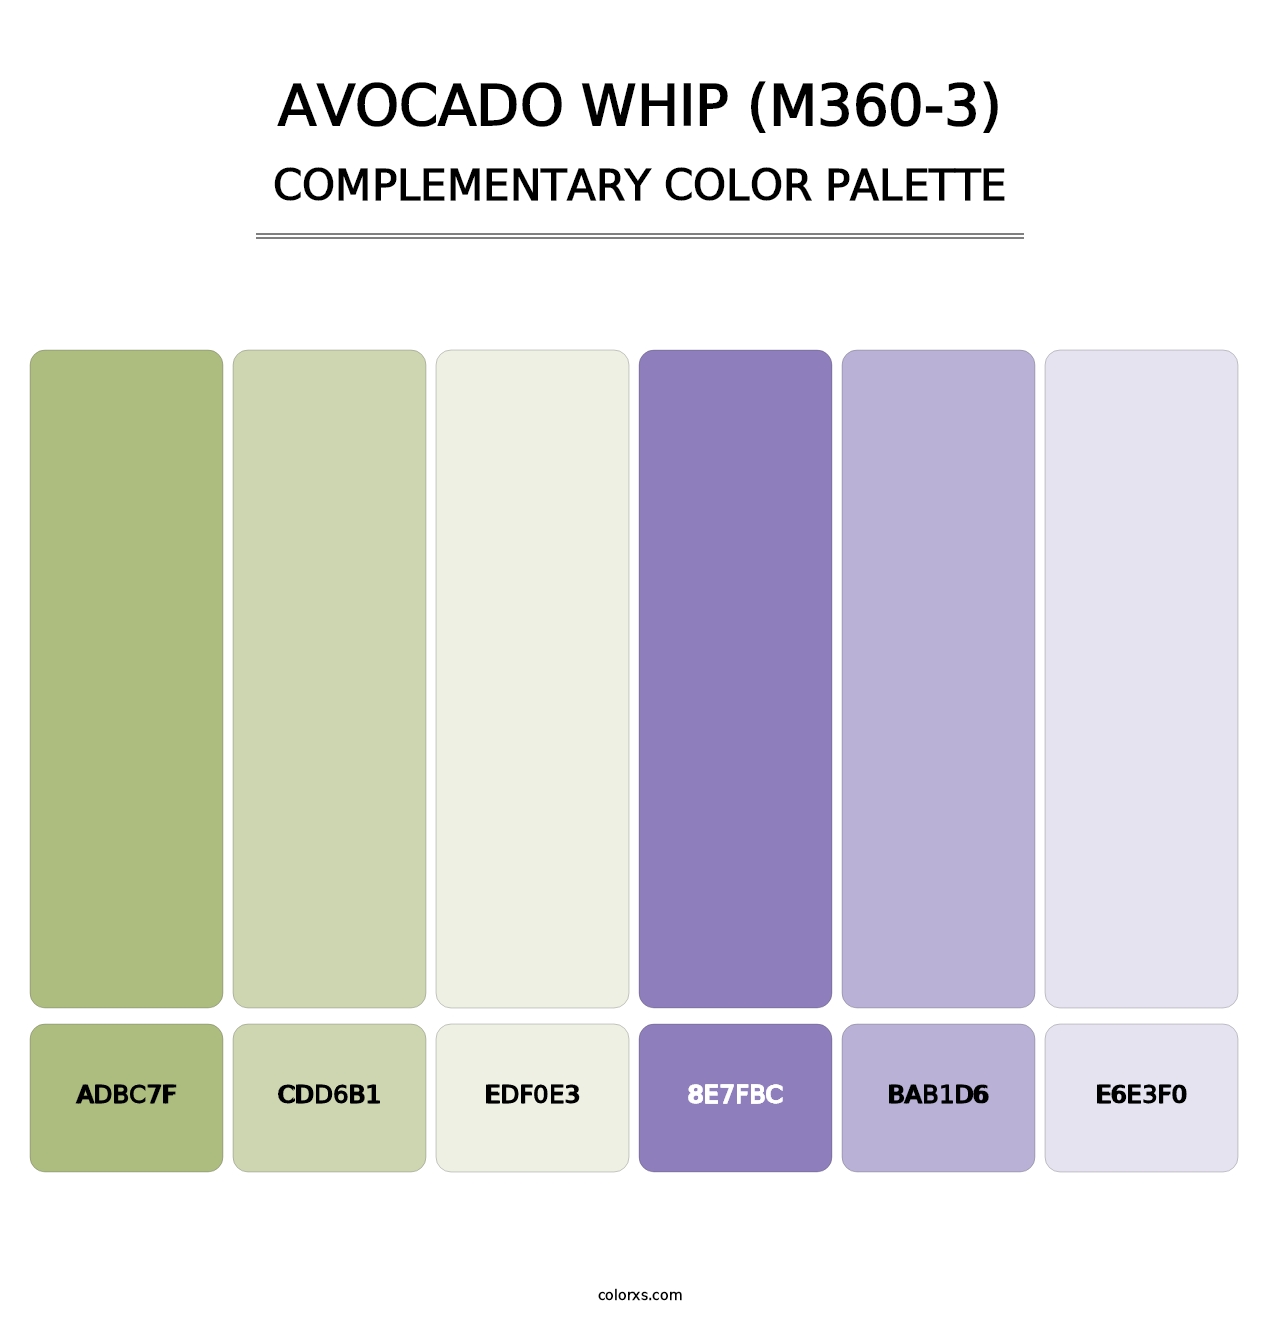 Avocado Whip (M360-3) - Complementary Color Palette